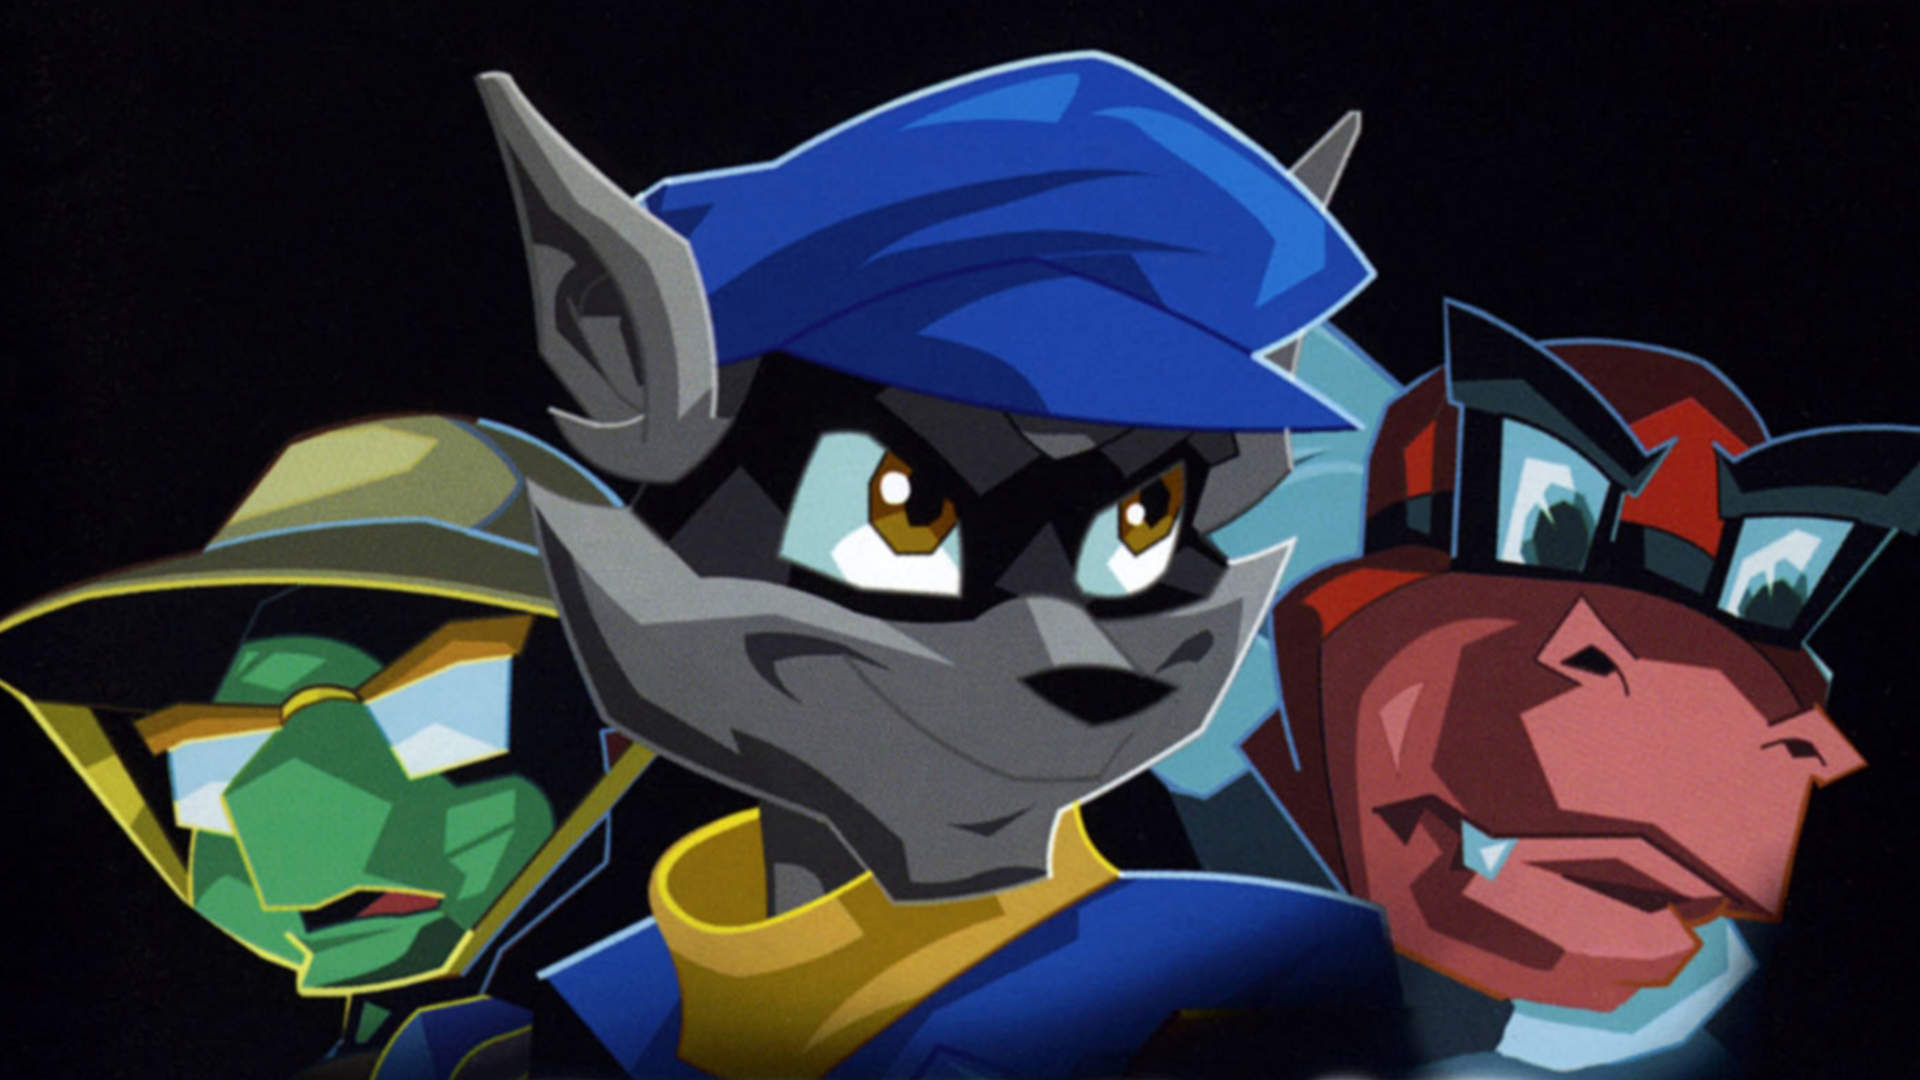 Next Sly Cooper Title Could be Developed by Concrete Genie Studio – Rumor